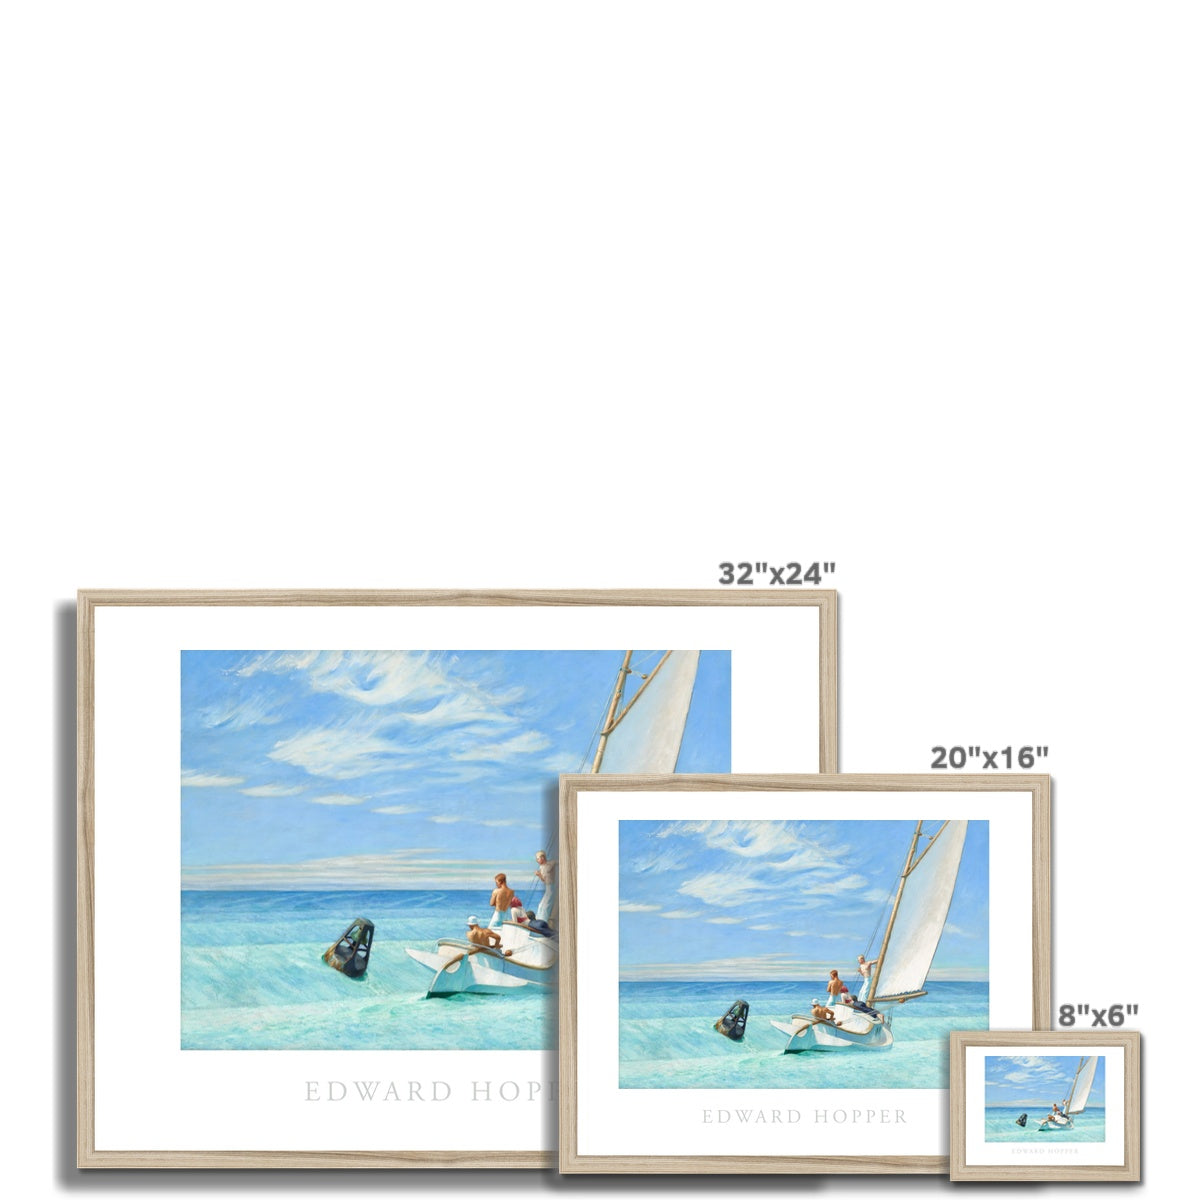 Hopper - Ground swell gerahmtes Poster - Atopurinto